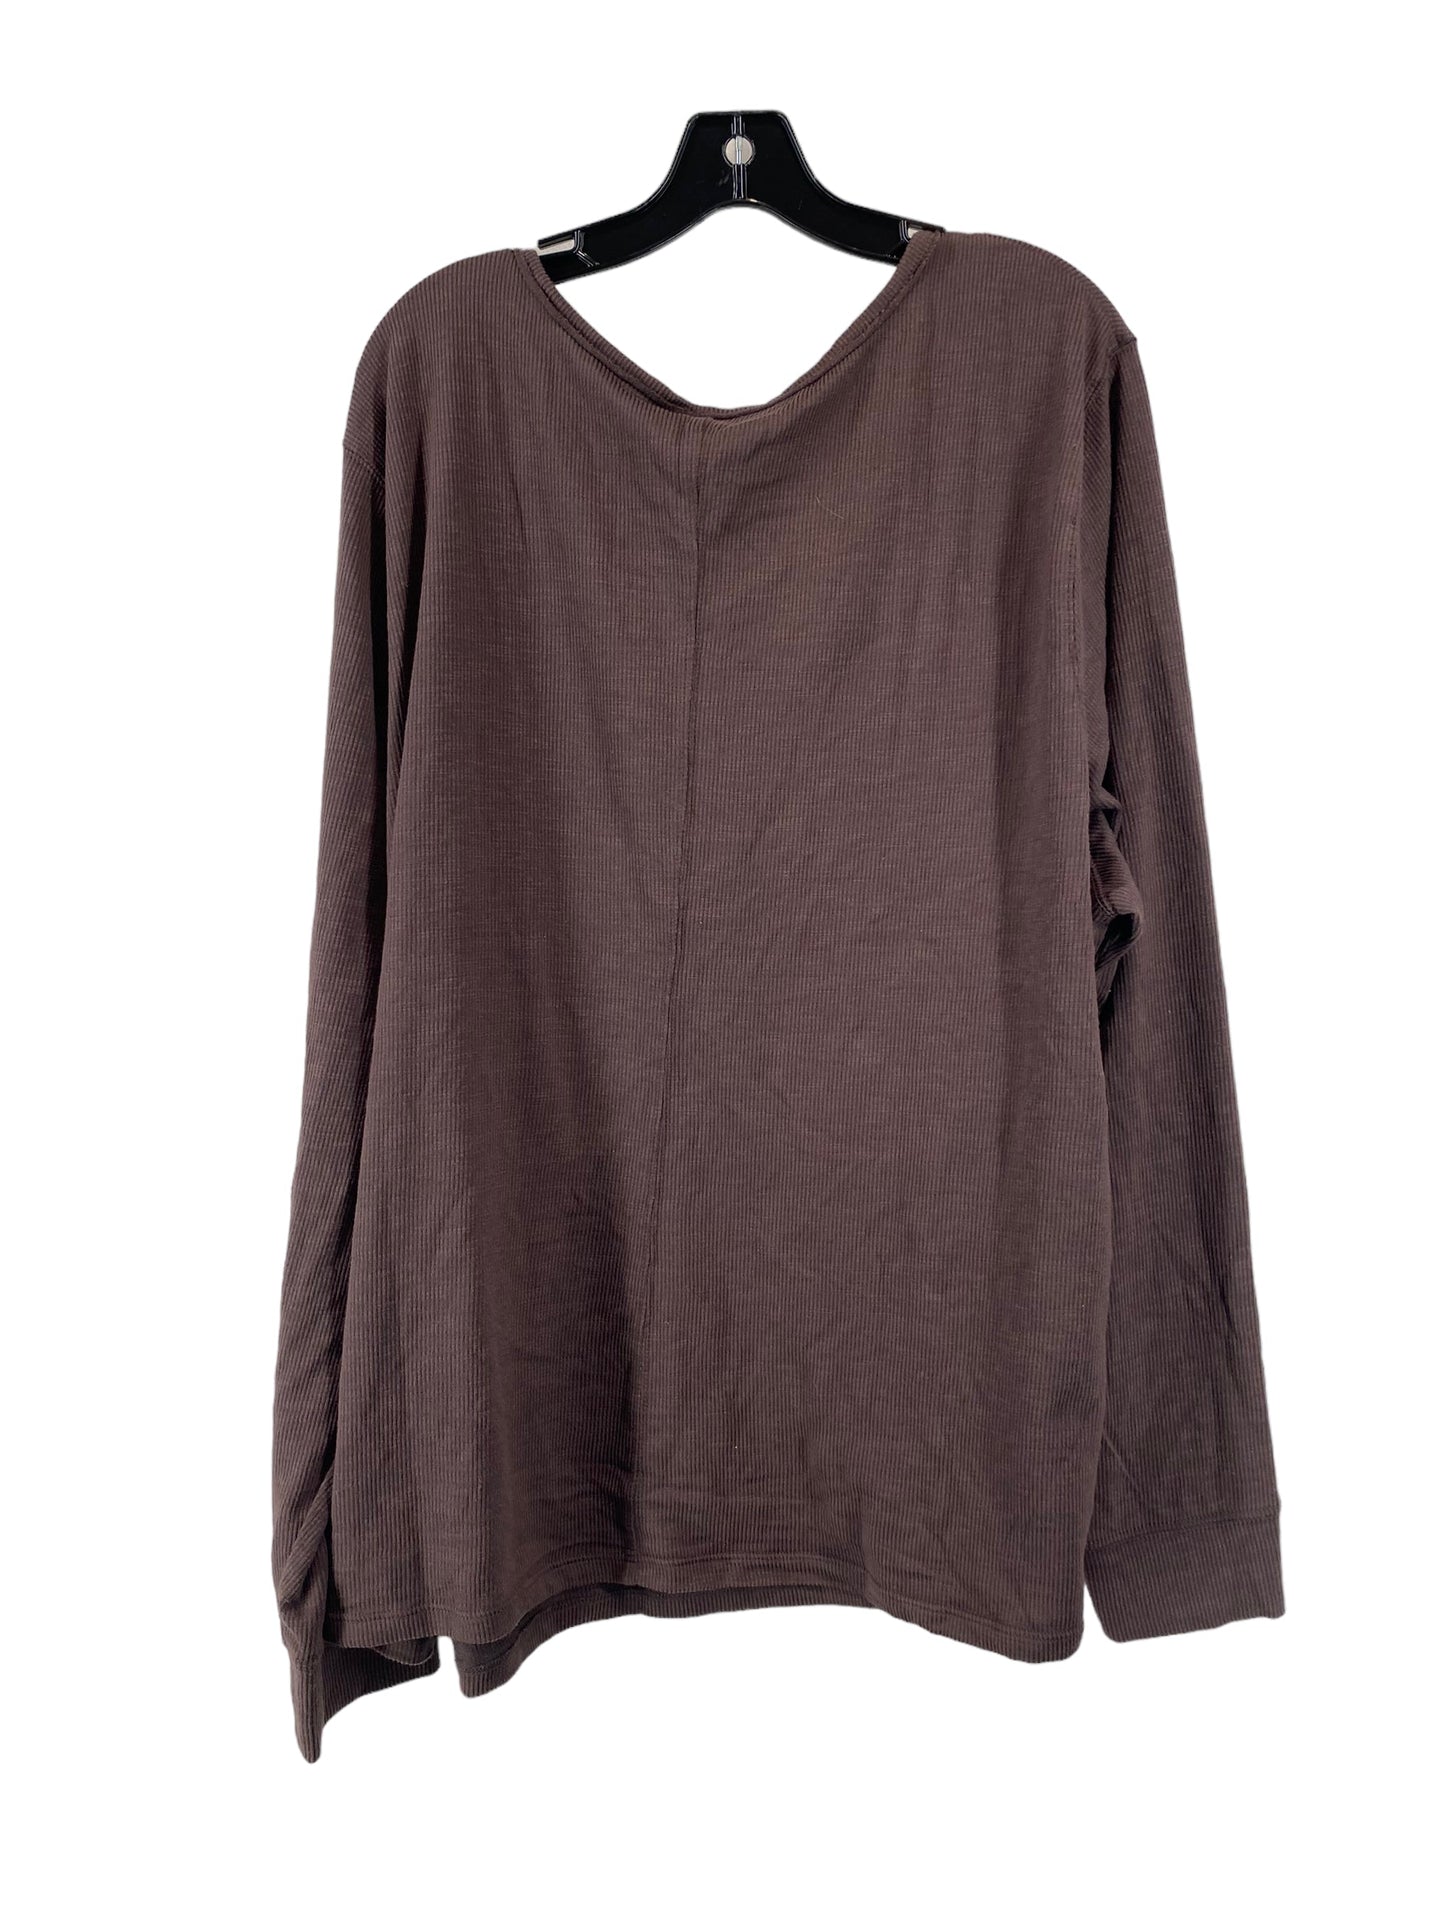 Top Long Sleeve By Universal Thread  Size: 4x